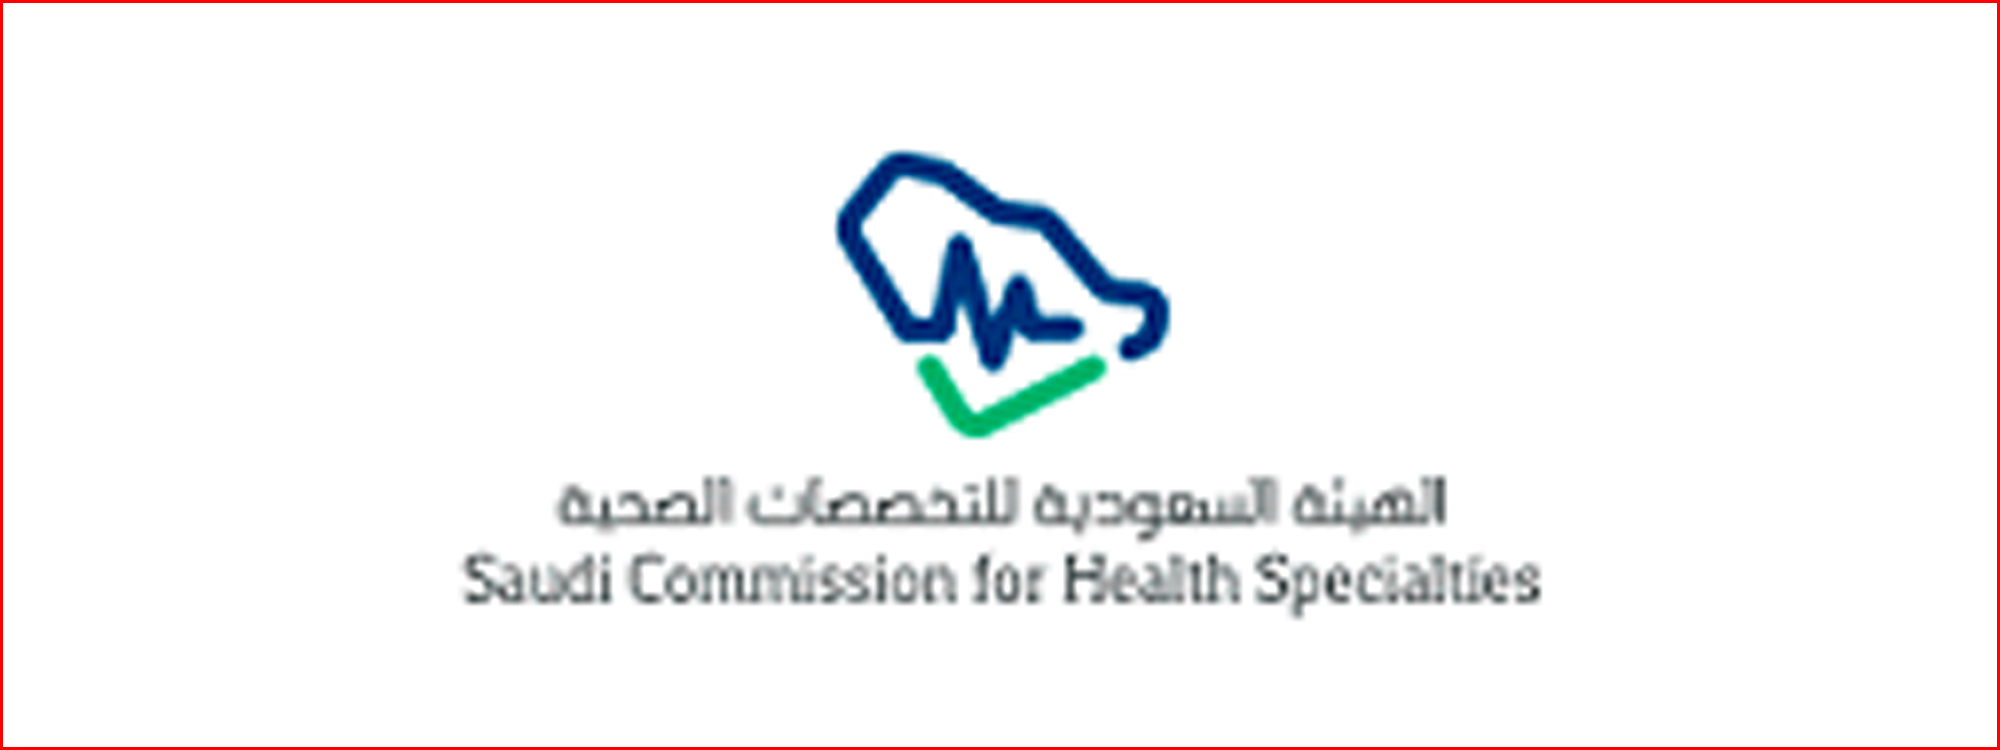 Saudi Commission for Health Specialties (SCHS) 